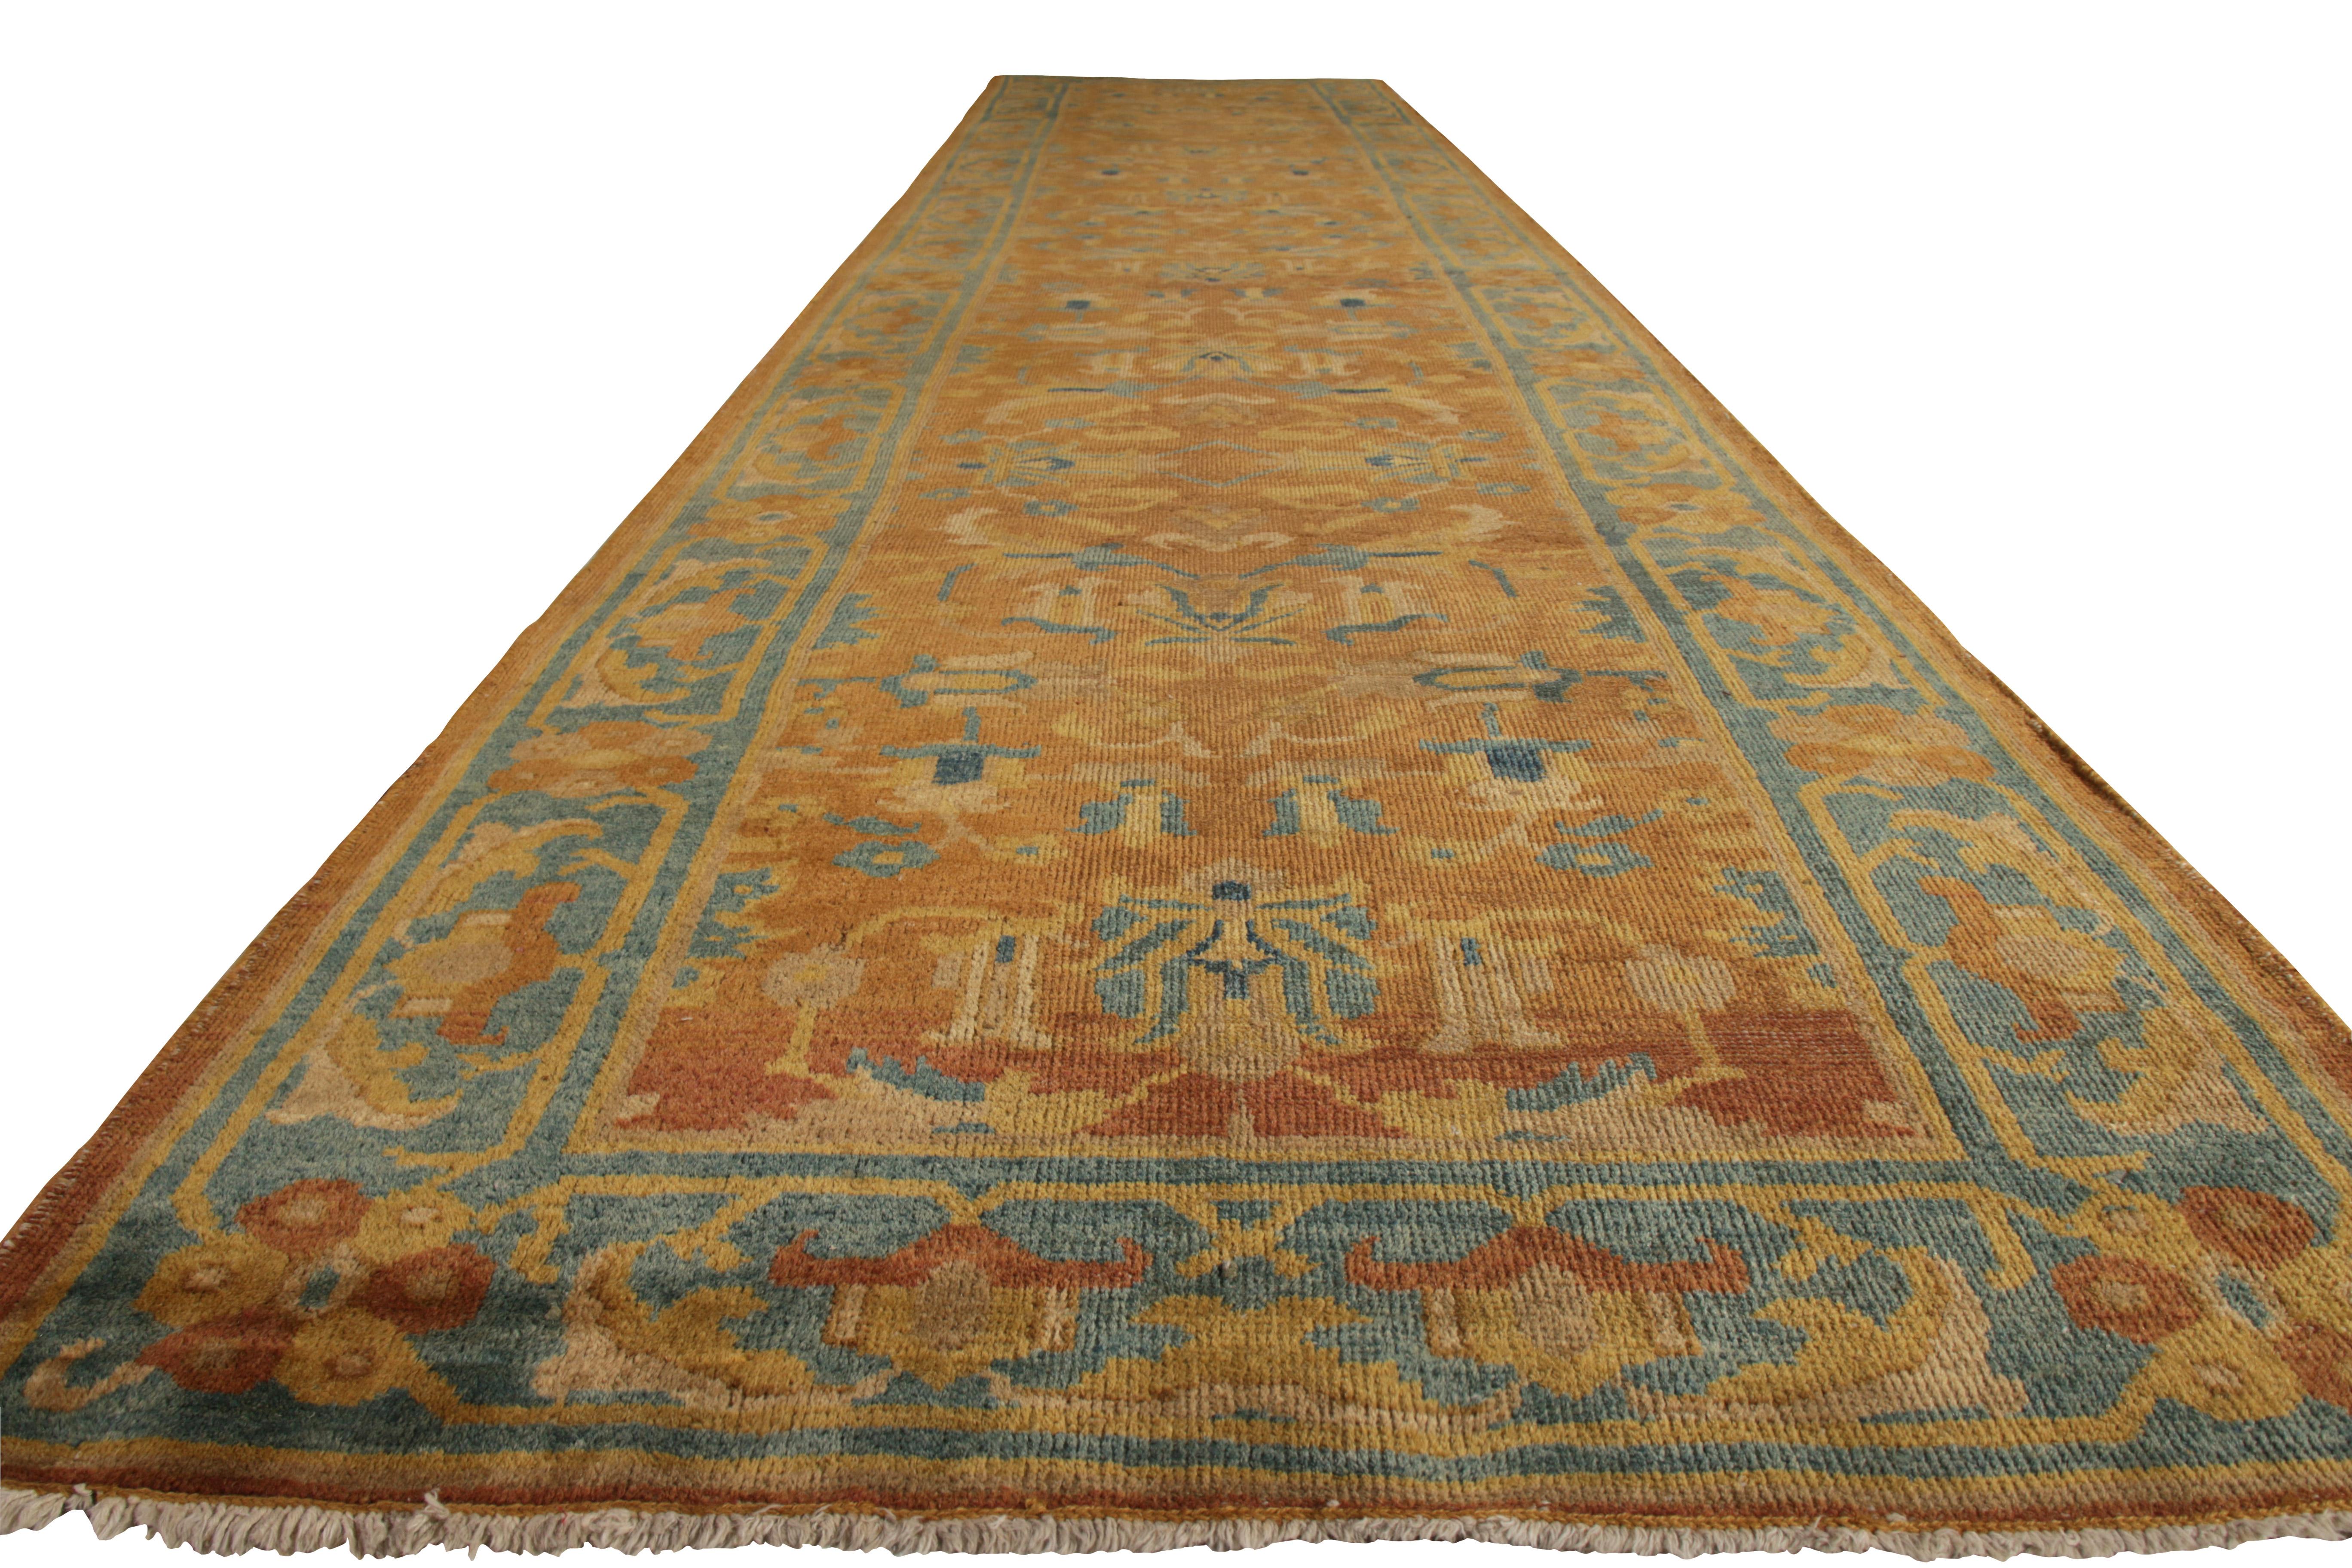 Rustic Early 20th Century Antique Runner Beige Blue Geometric Floral Amritsar Rug